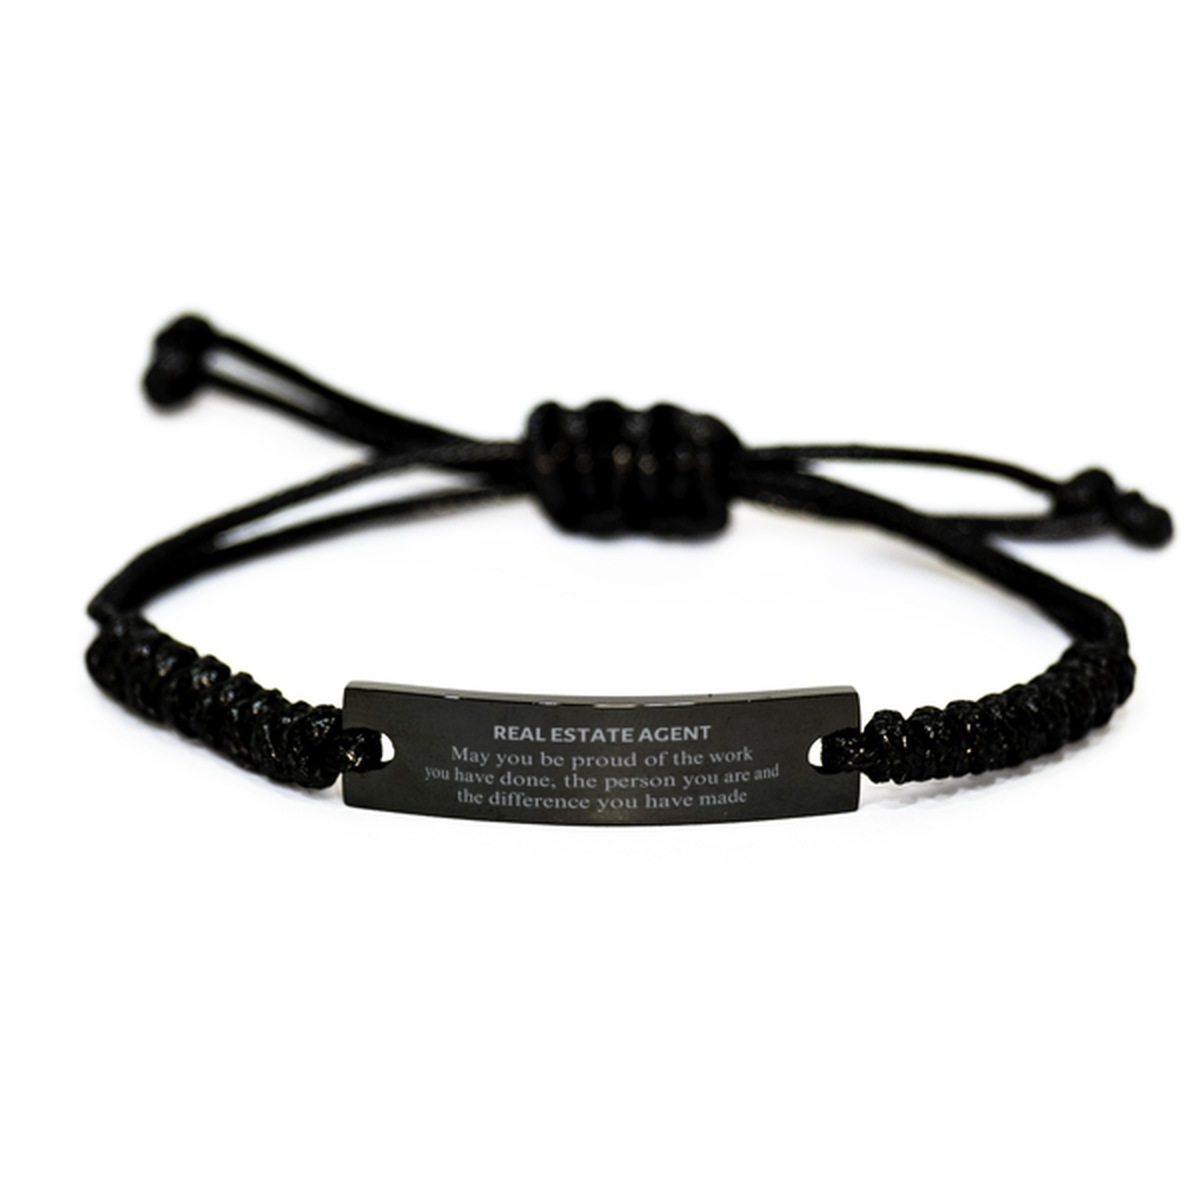 Real Estate Agent May you be proud of the work you have done, Retirement Real Estate Agent Black Rope Bracelet for Colleague Appreciation Gifts Amazing for Real Estate Agent